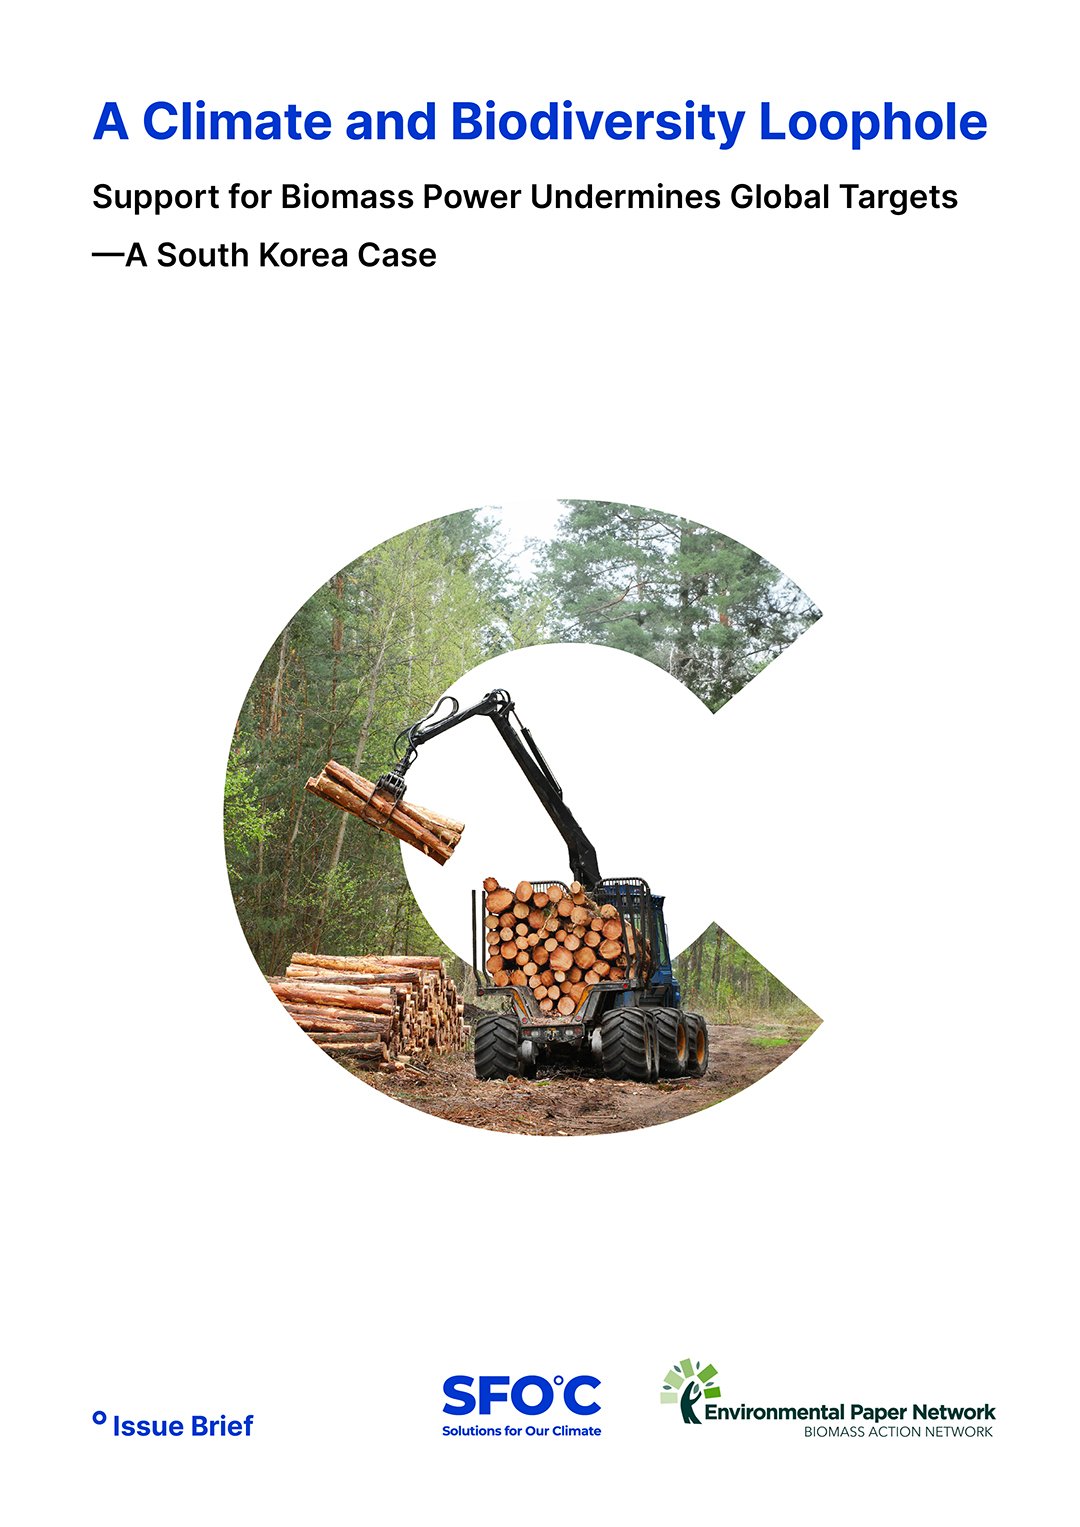 A Climate and Biodiversity Loophole Support for Biomass Power Undermines Global Targets —A South Korea Case